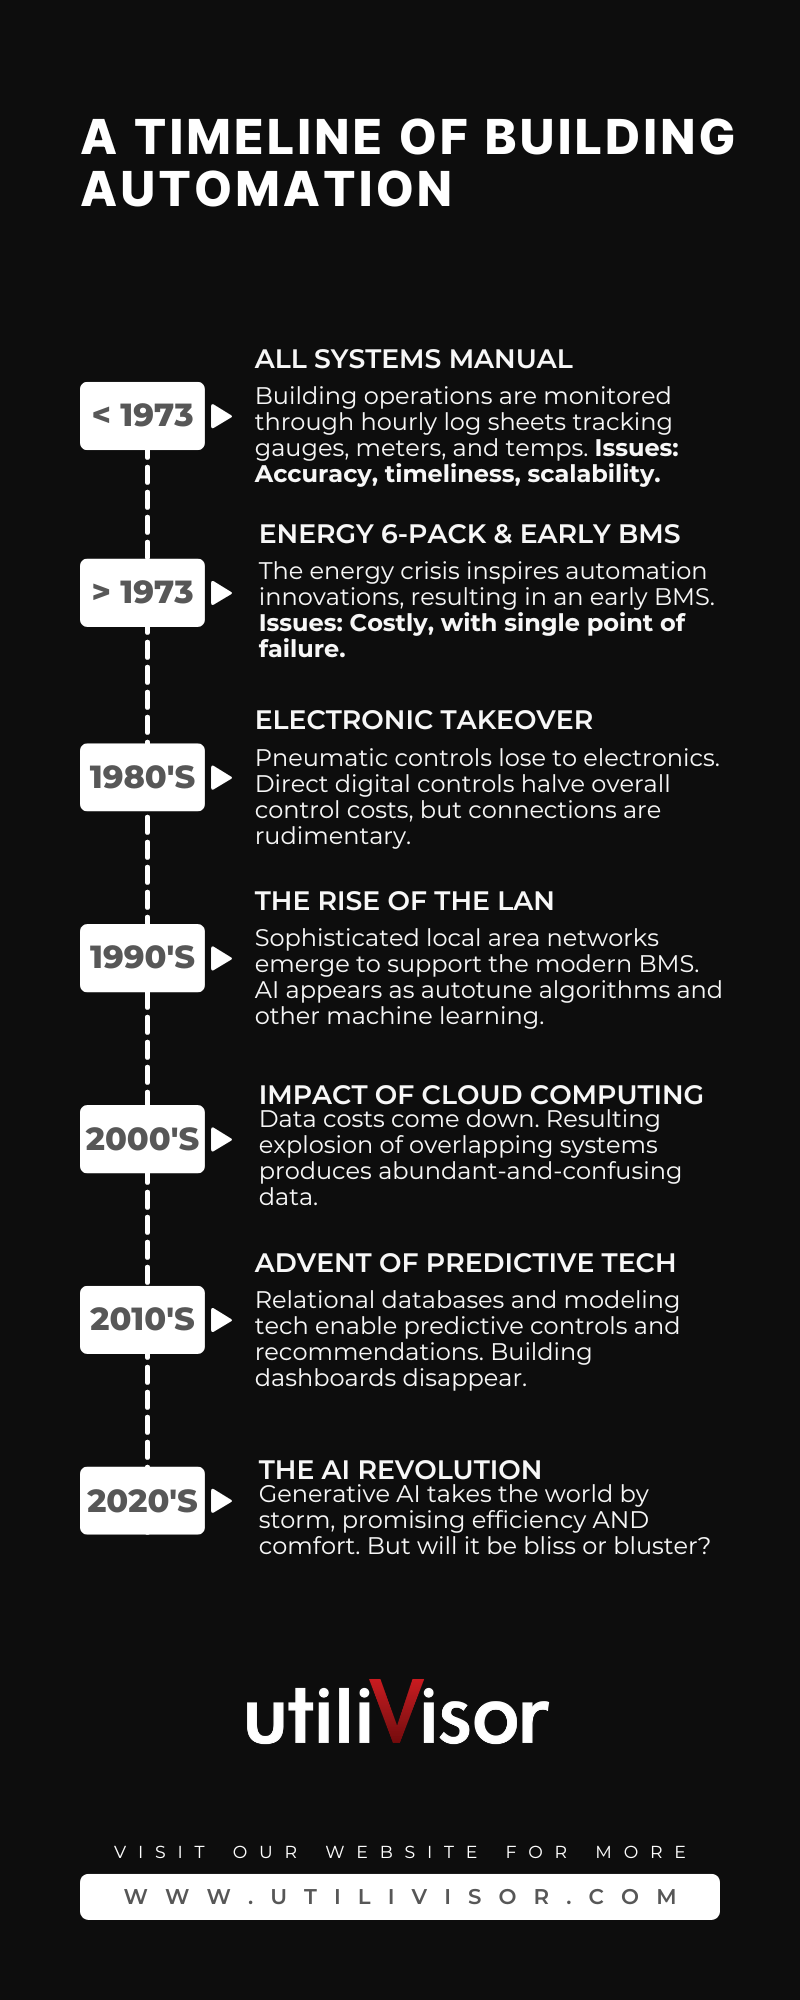 A short history of building automation